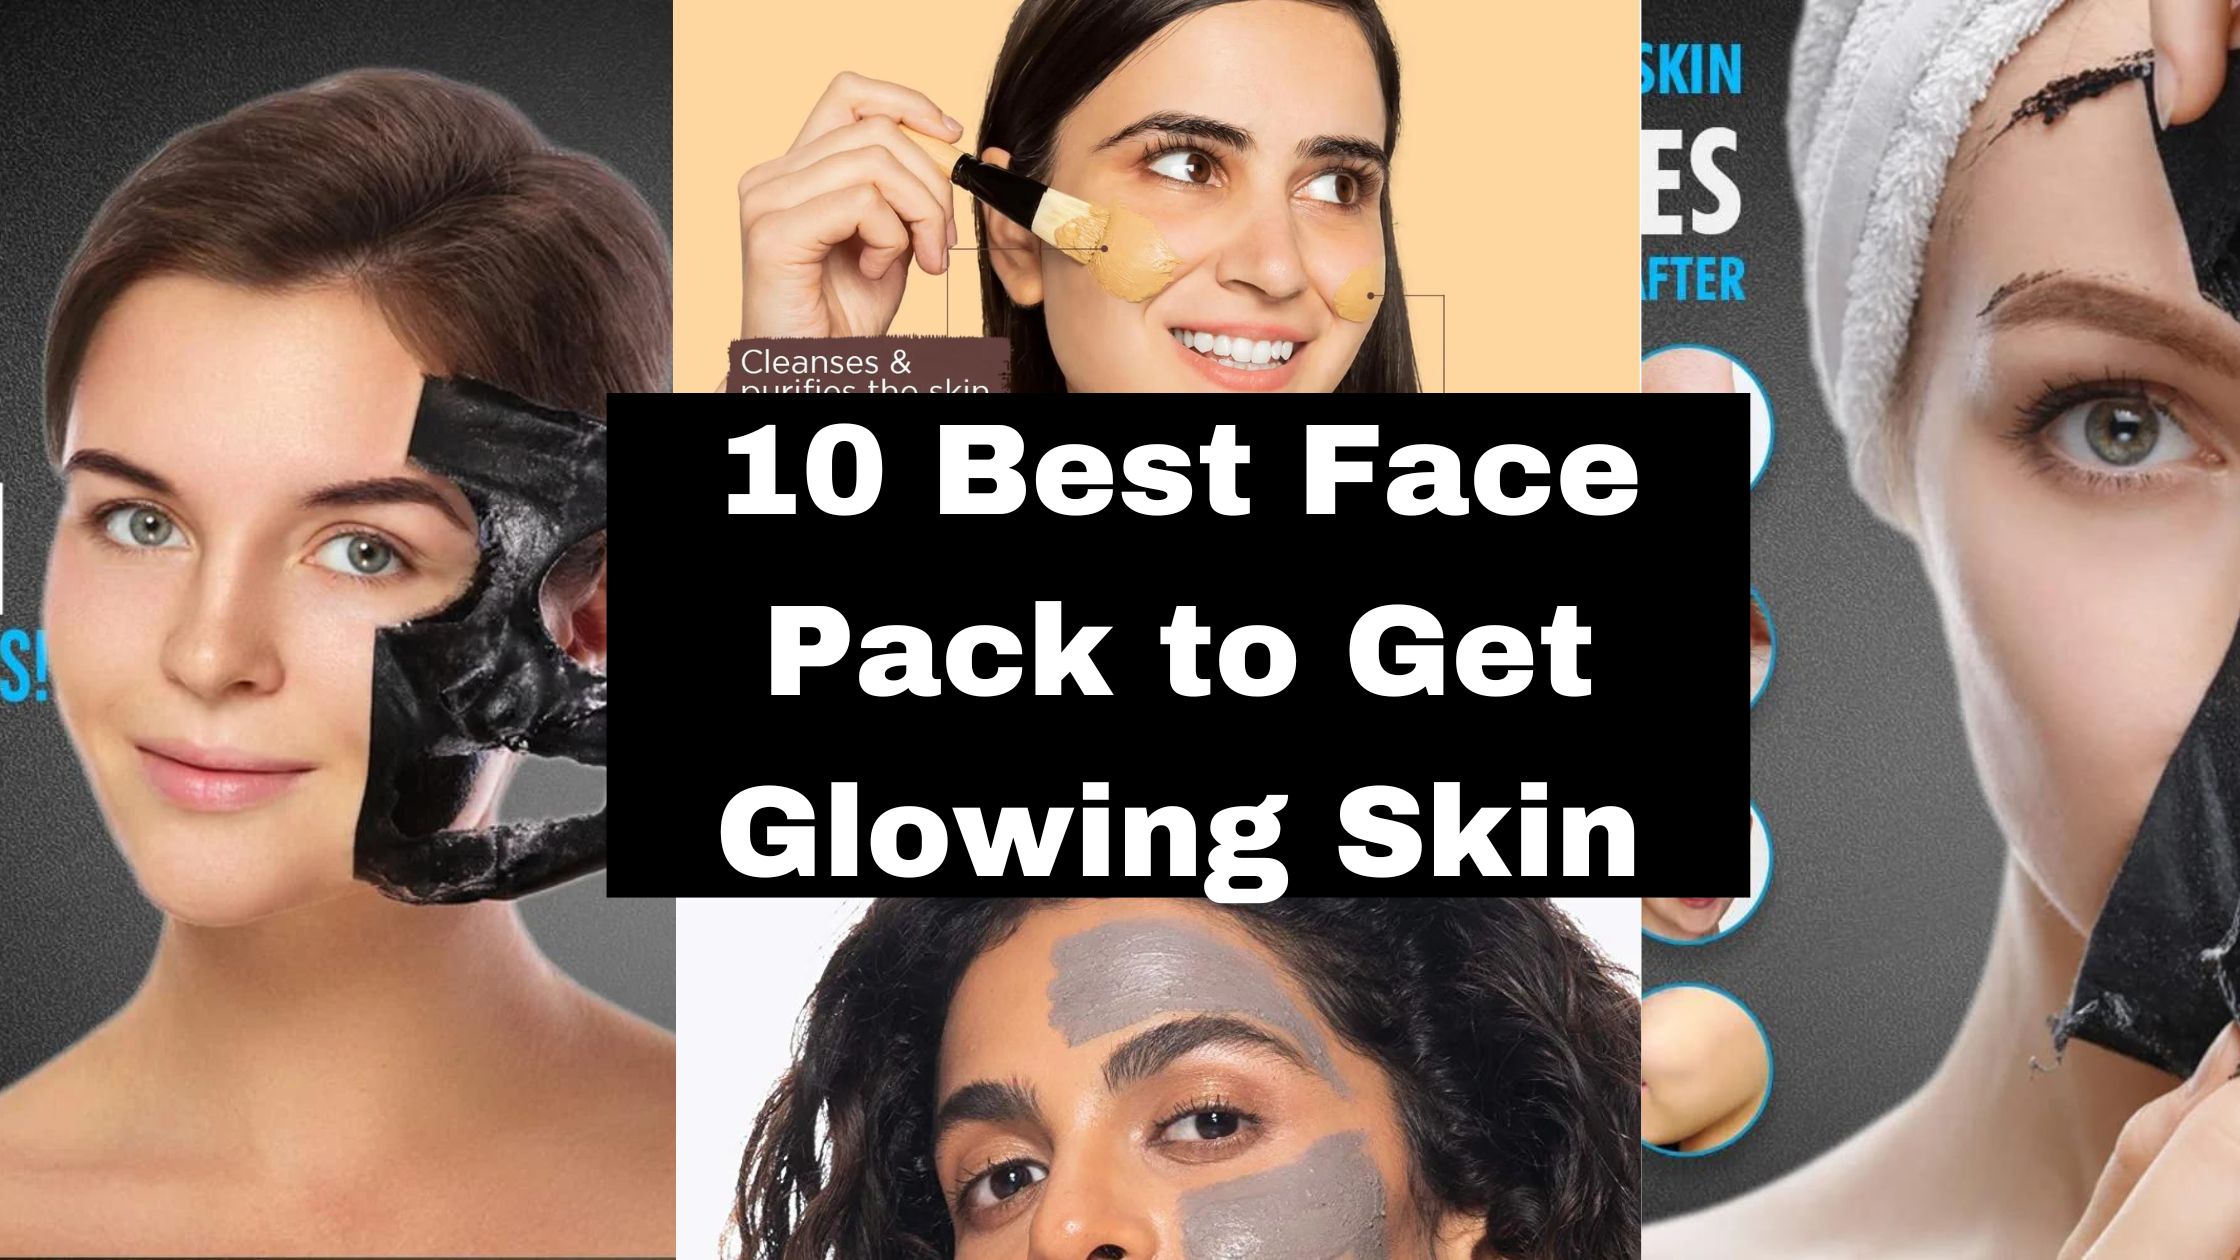 10 Best Face Pack for Glowing Skin